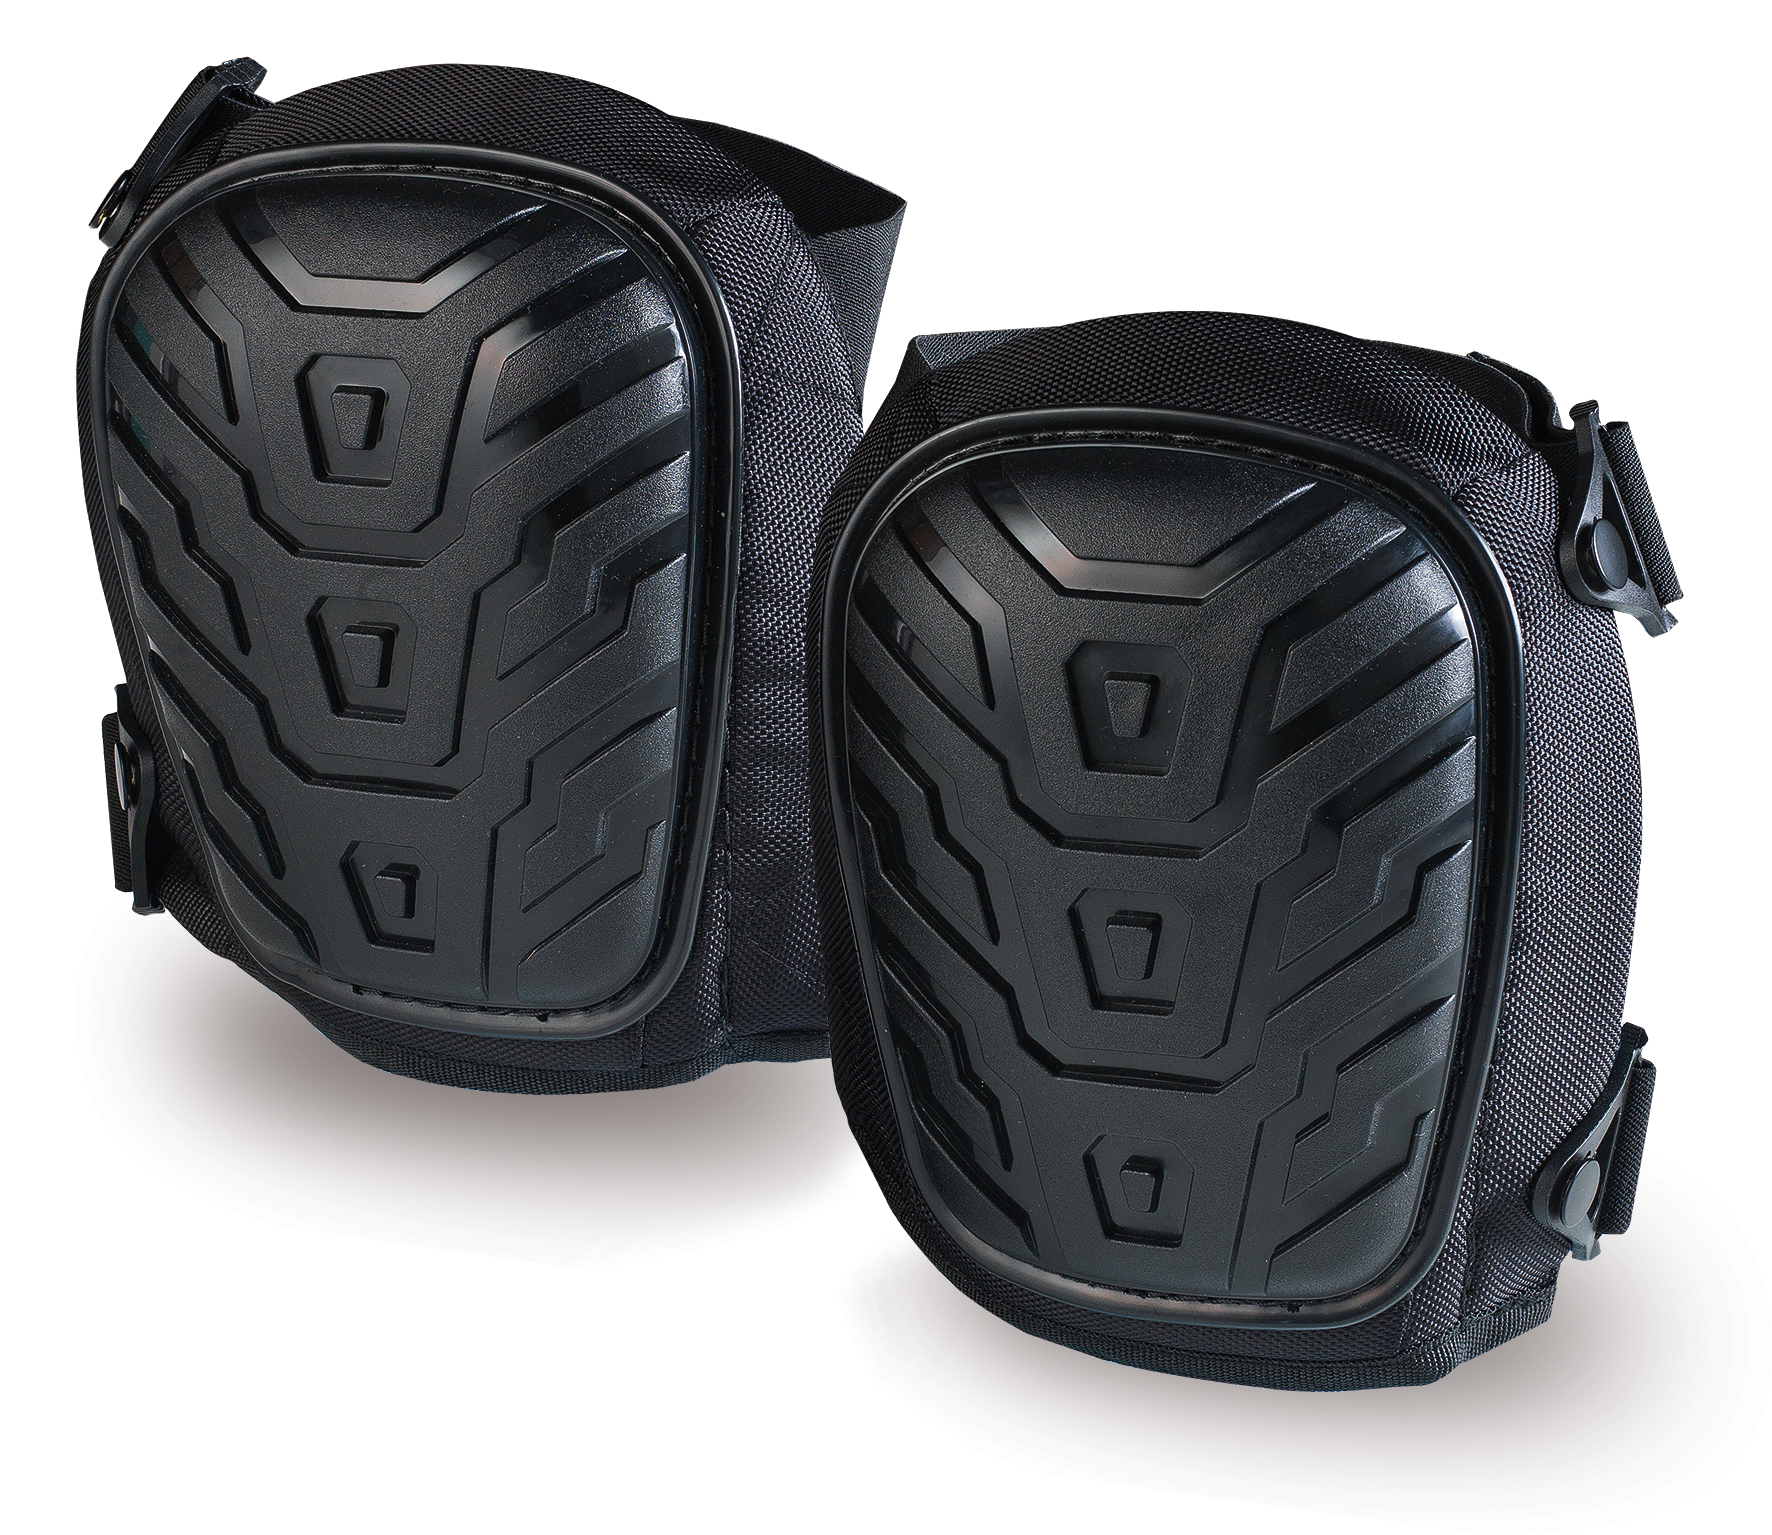 1388RRPSIN Workwear Accessories and complements PRO Rigid Knee Pad.